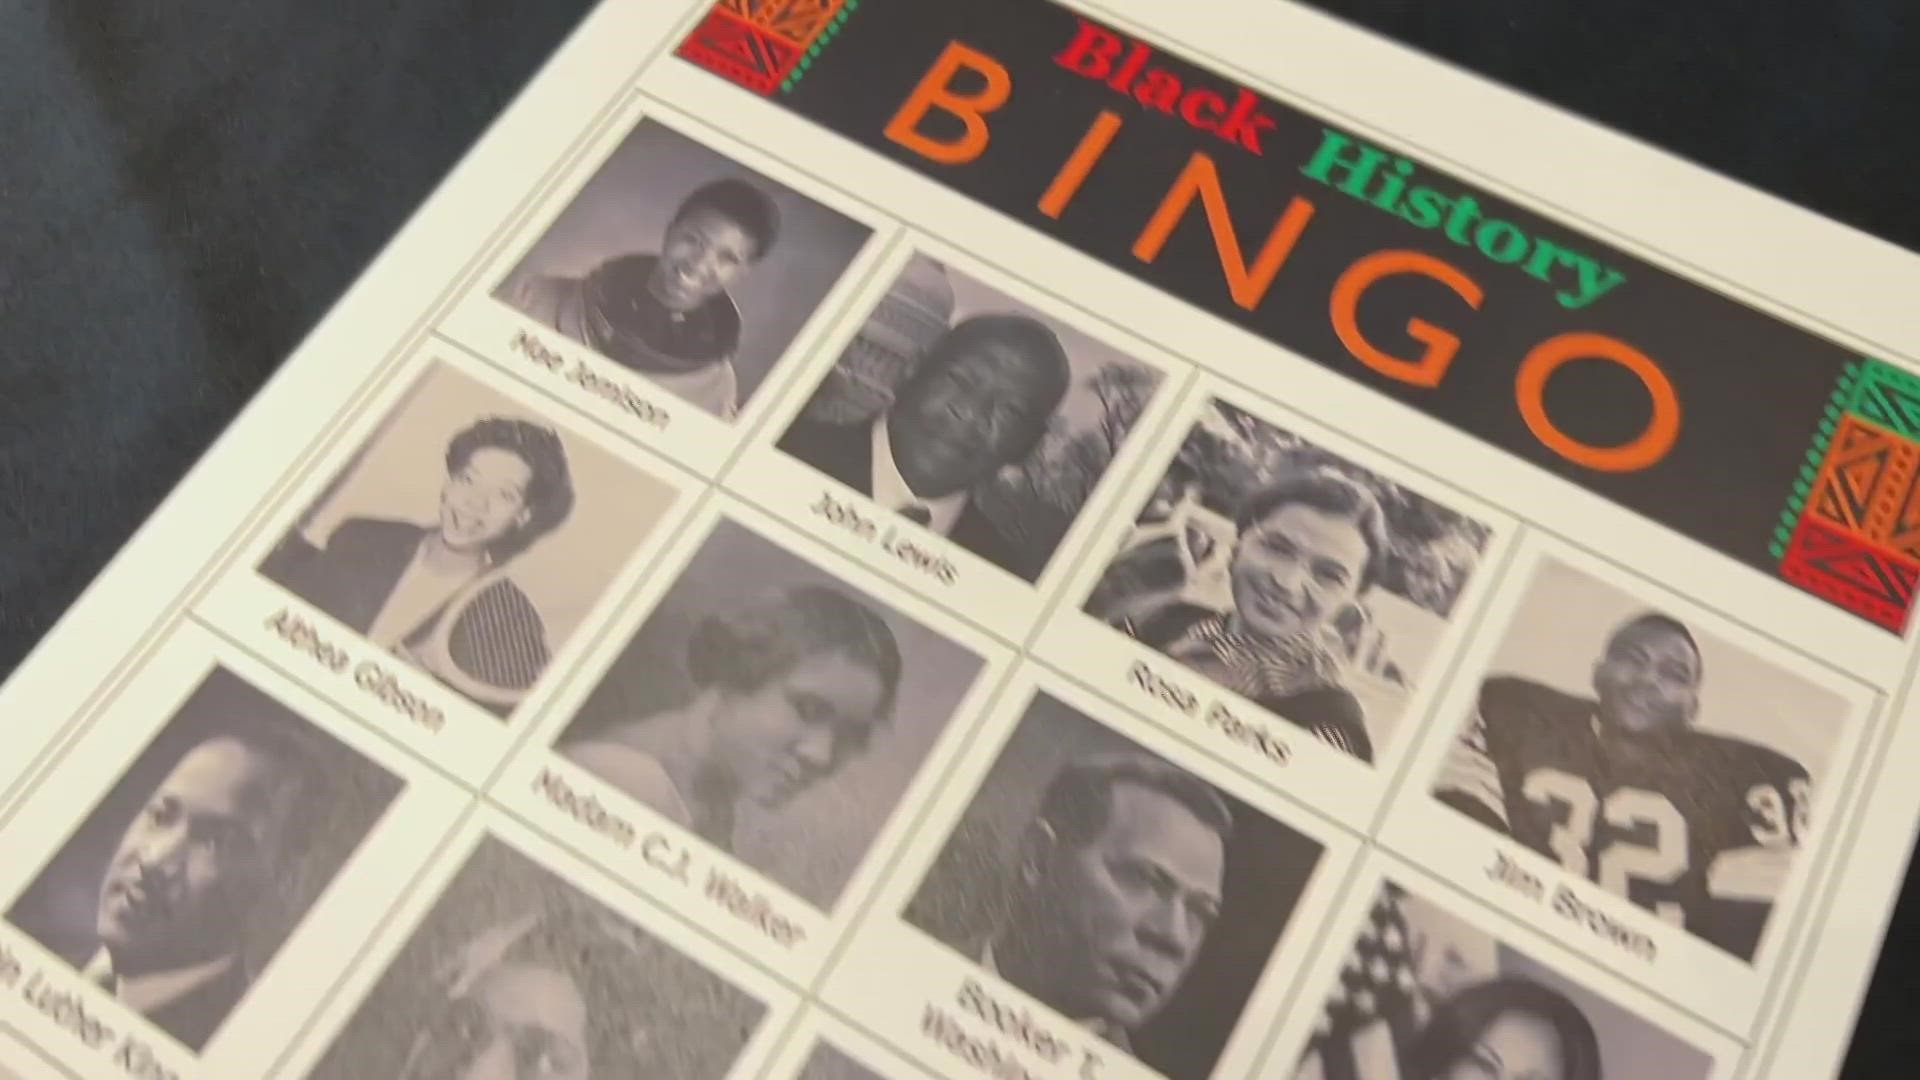 A local retirement community is celebrating Black trailblazers with an age-old game of BINGO.